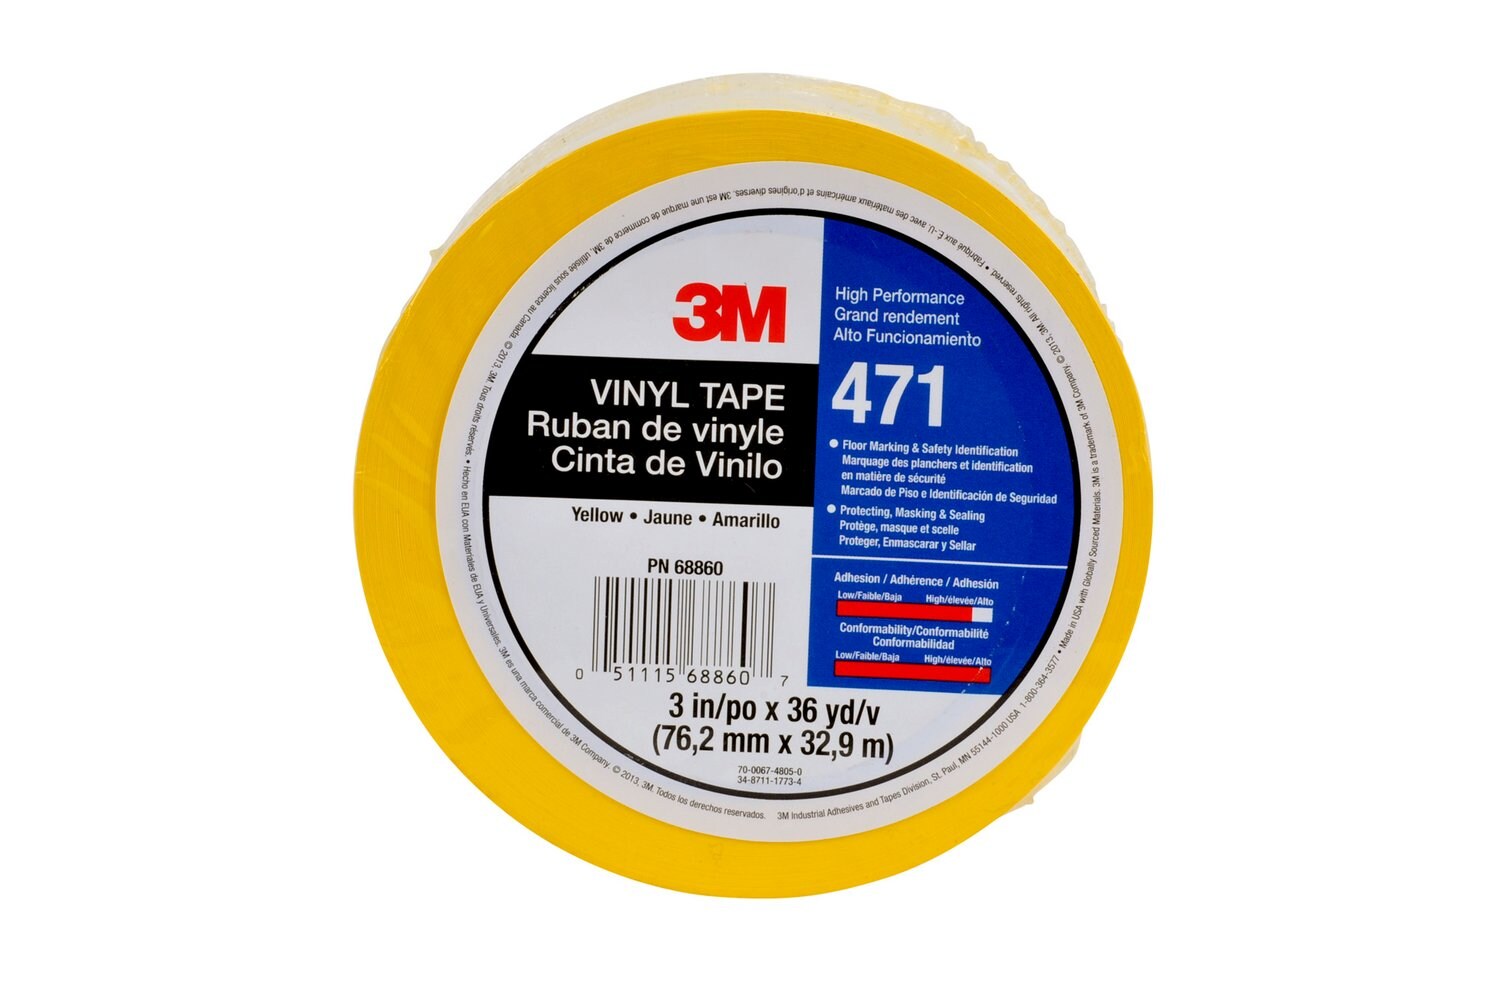 7010316494 - 3M Vinyl Tape 471, Yellow, 1 1/2 in x 36 yd, 5.2 mils, 24 rolls per
case, Individually Wrapped Conveniently Packaged